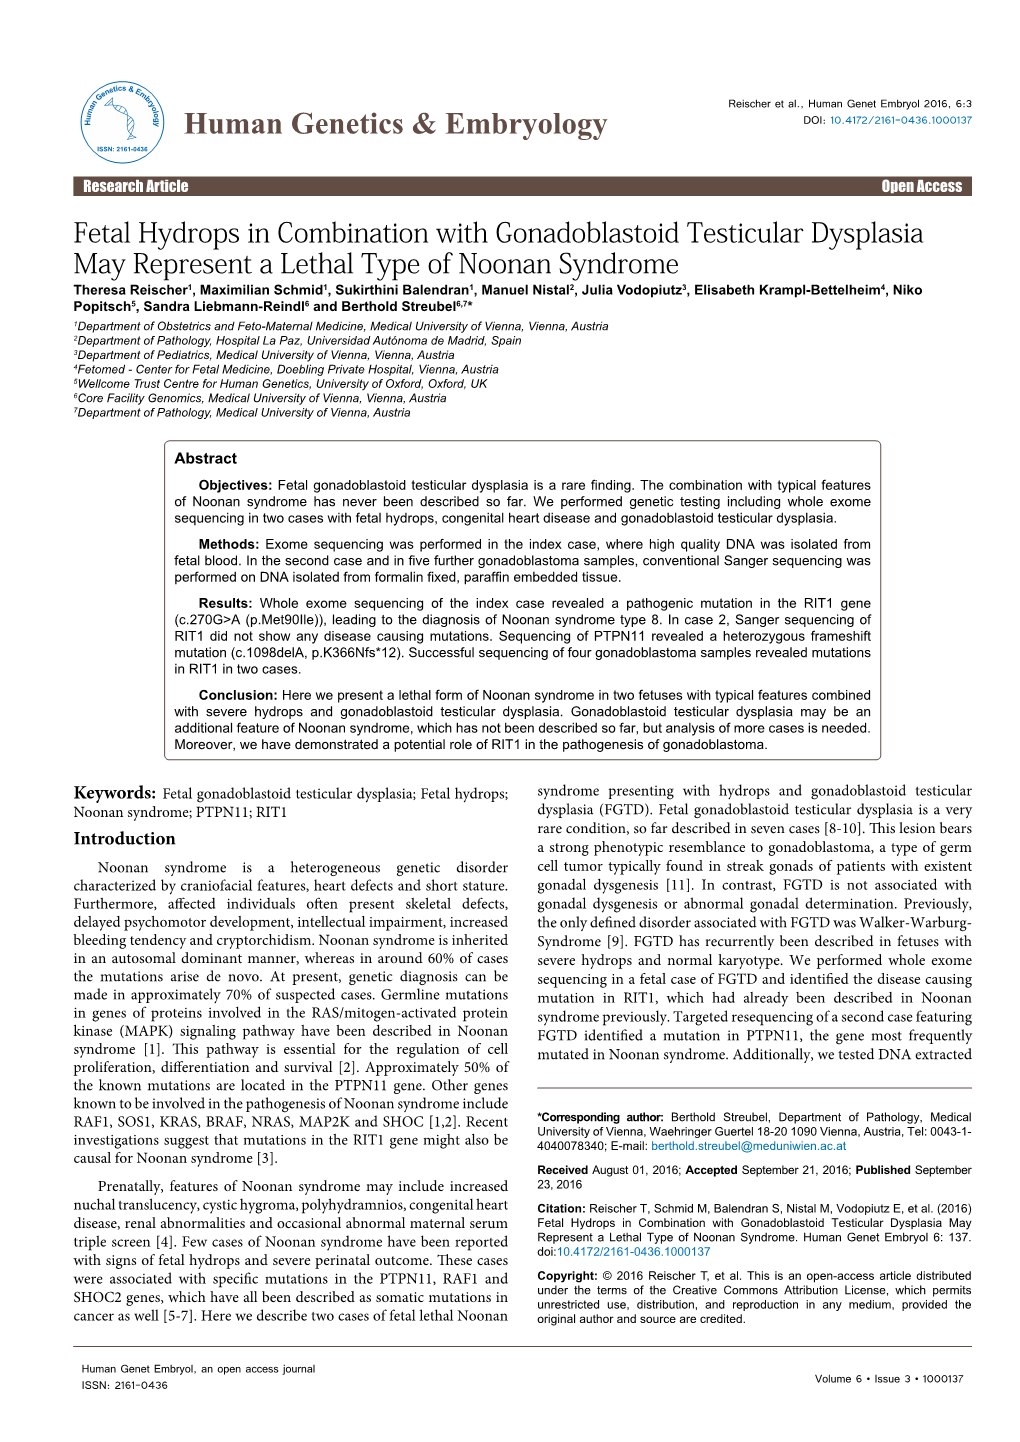 Fetal Hydrops in Combination with Gonadoblastoid Testicular Dysplasia May Represent a Lethal Type of Noonan Syndrome